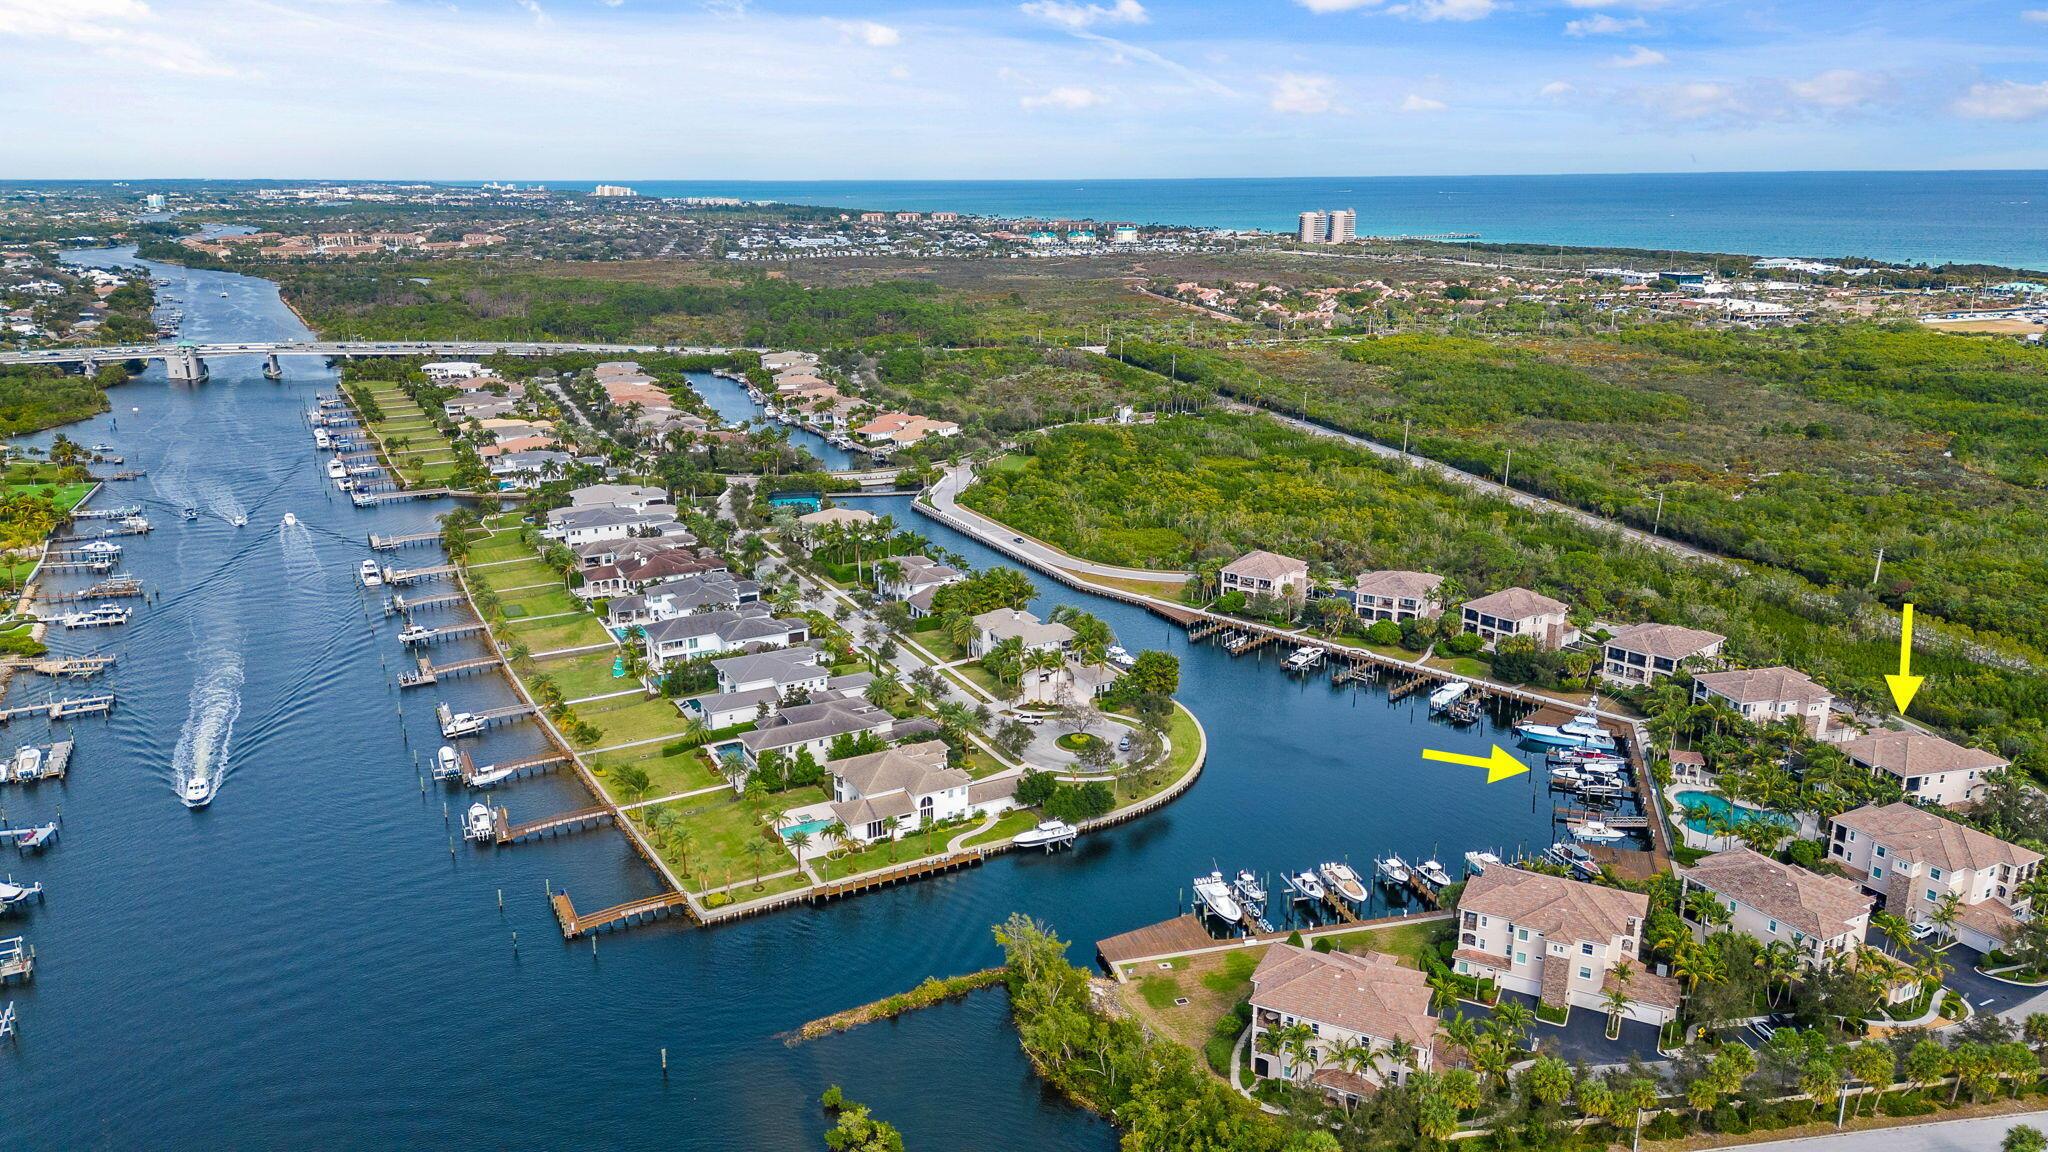 A luxury property in a premier location. Elegant 3-bedroom condo in exclusive Frenchman's Harbor. A gated, waterfront community, Frenchman's Harbor affords owners direct Intracoastal access, deep water slips, and no fixed bridges to the ocean. This property includes a deeded 45-foot boat slip. The home itself features an efficient, airy floorplan with a large, open chef's kitchen. Wood floors, custom trim, custom built-ins, high ceilings, and appealing colors give this unit a bright, coastal feel. Oversized balcony offers canal, pool, Intracoastal and sunset views. The best of condo and single family living with a private 2 car garage and plenty of driveway space. Unit is accessible with staircase and elevator options. Full hurricane impact windows and doors.